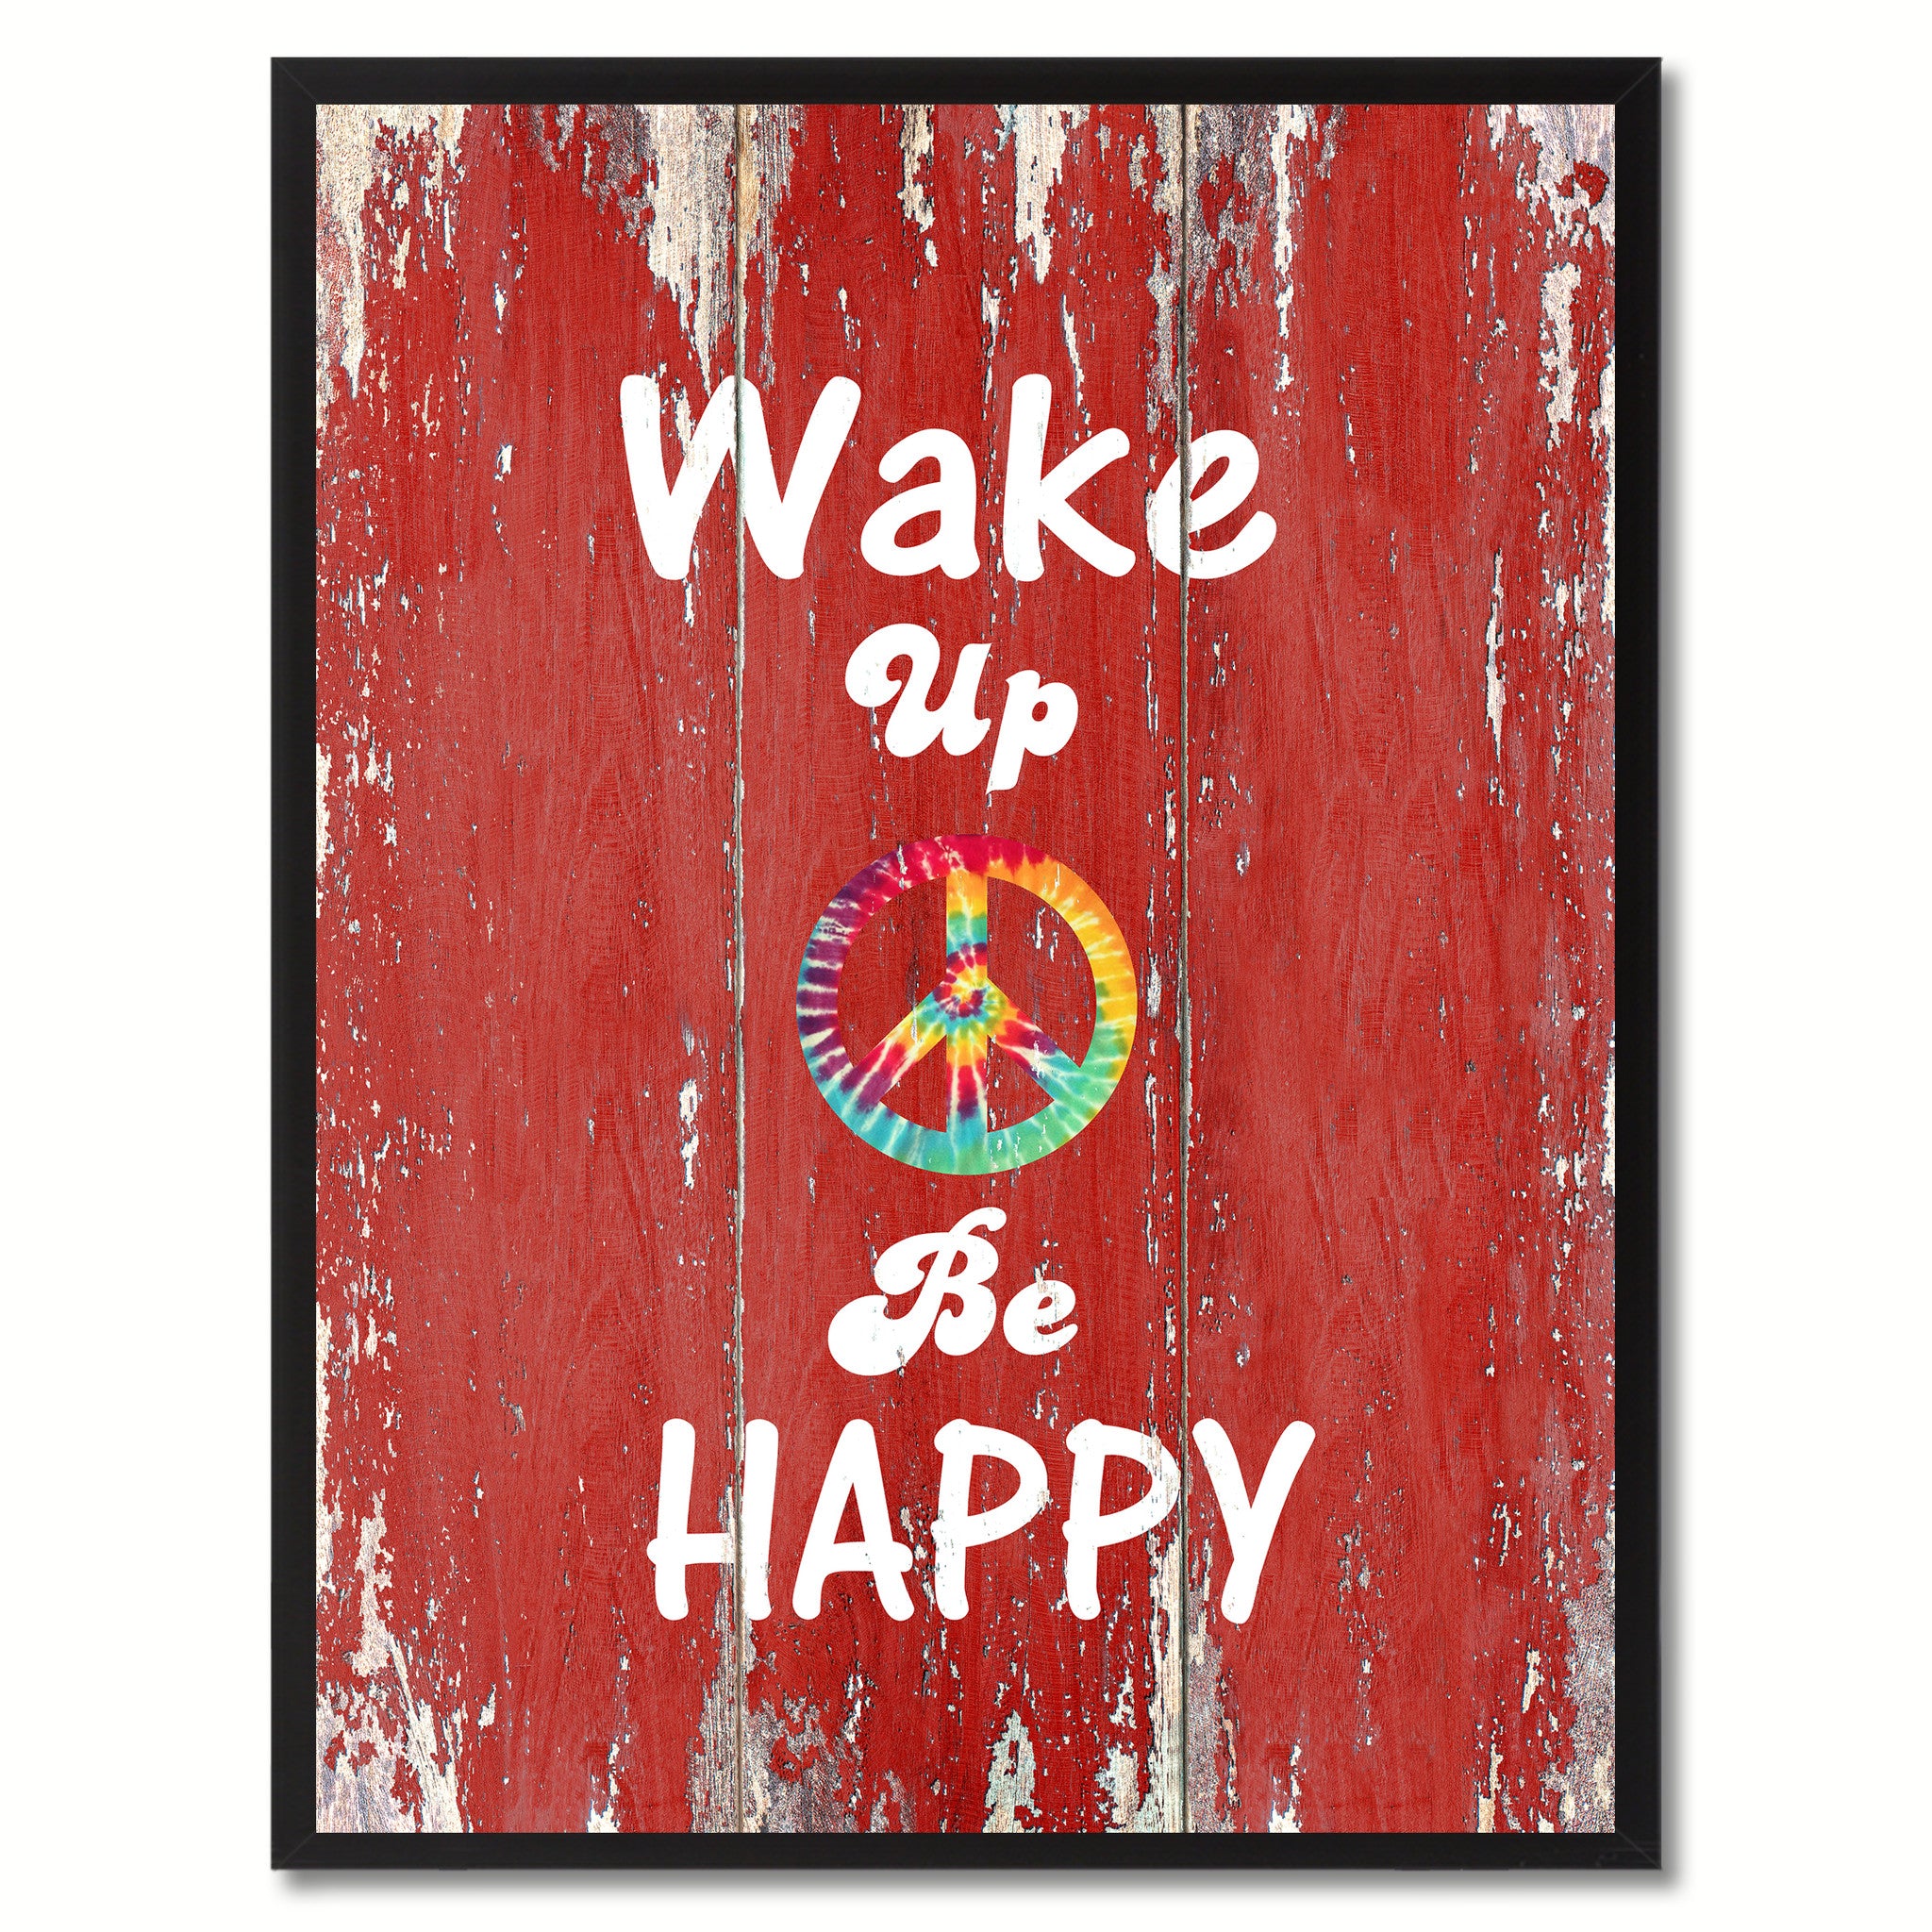 Wake Up & Be Happy Saying Canvas Print, Black Picture Frame Home Decor Wall Art Gifts